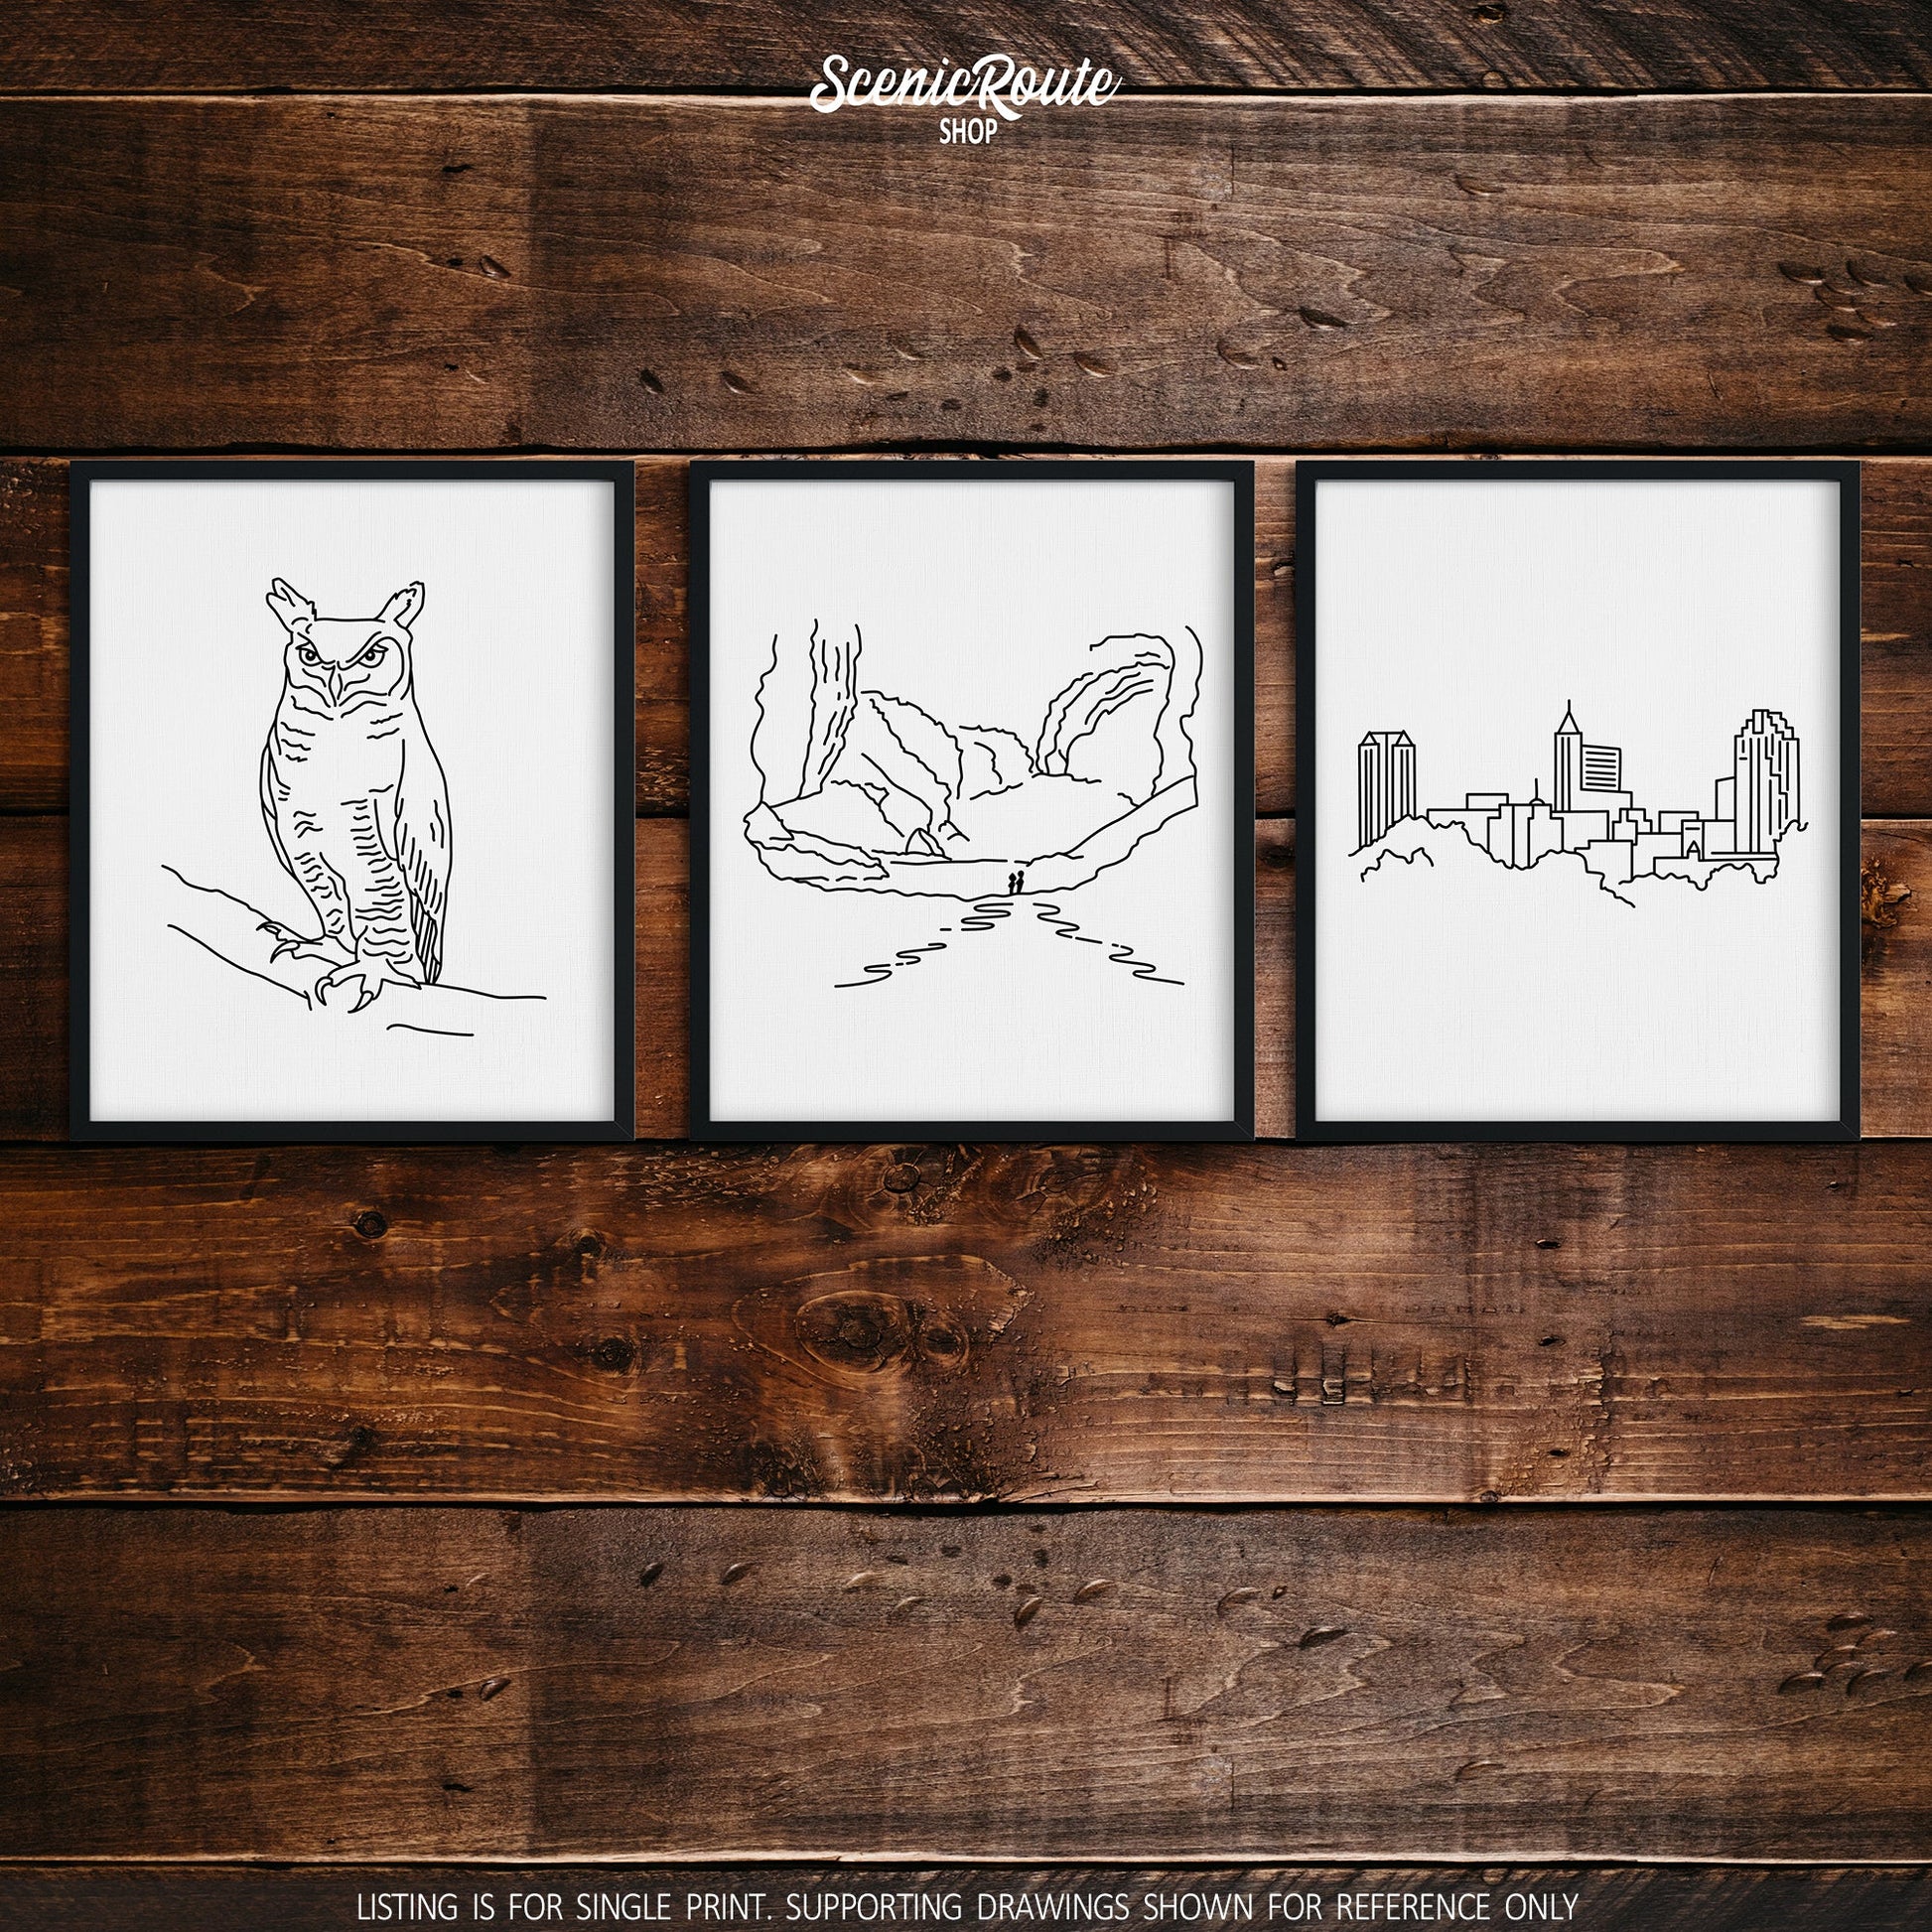 A group of three framed drawings on a wood wall. The line art drawings include an Owl, Wind Cave National Park, and the Raleigh Skyline